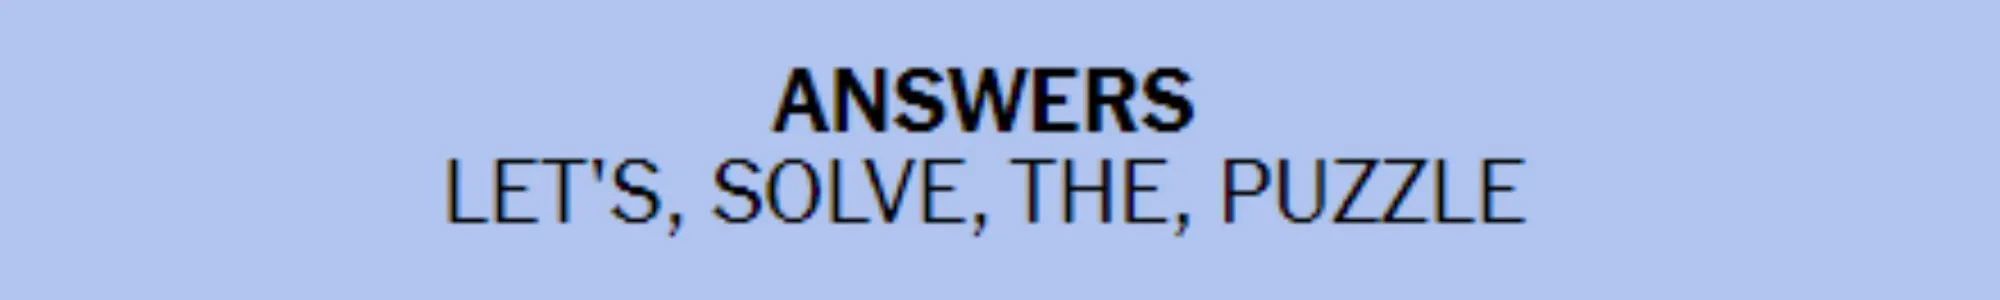 answers-banner